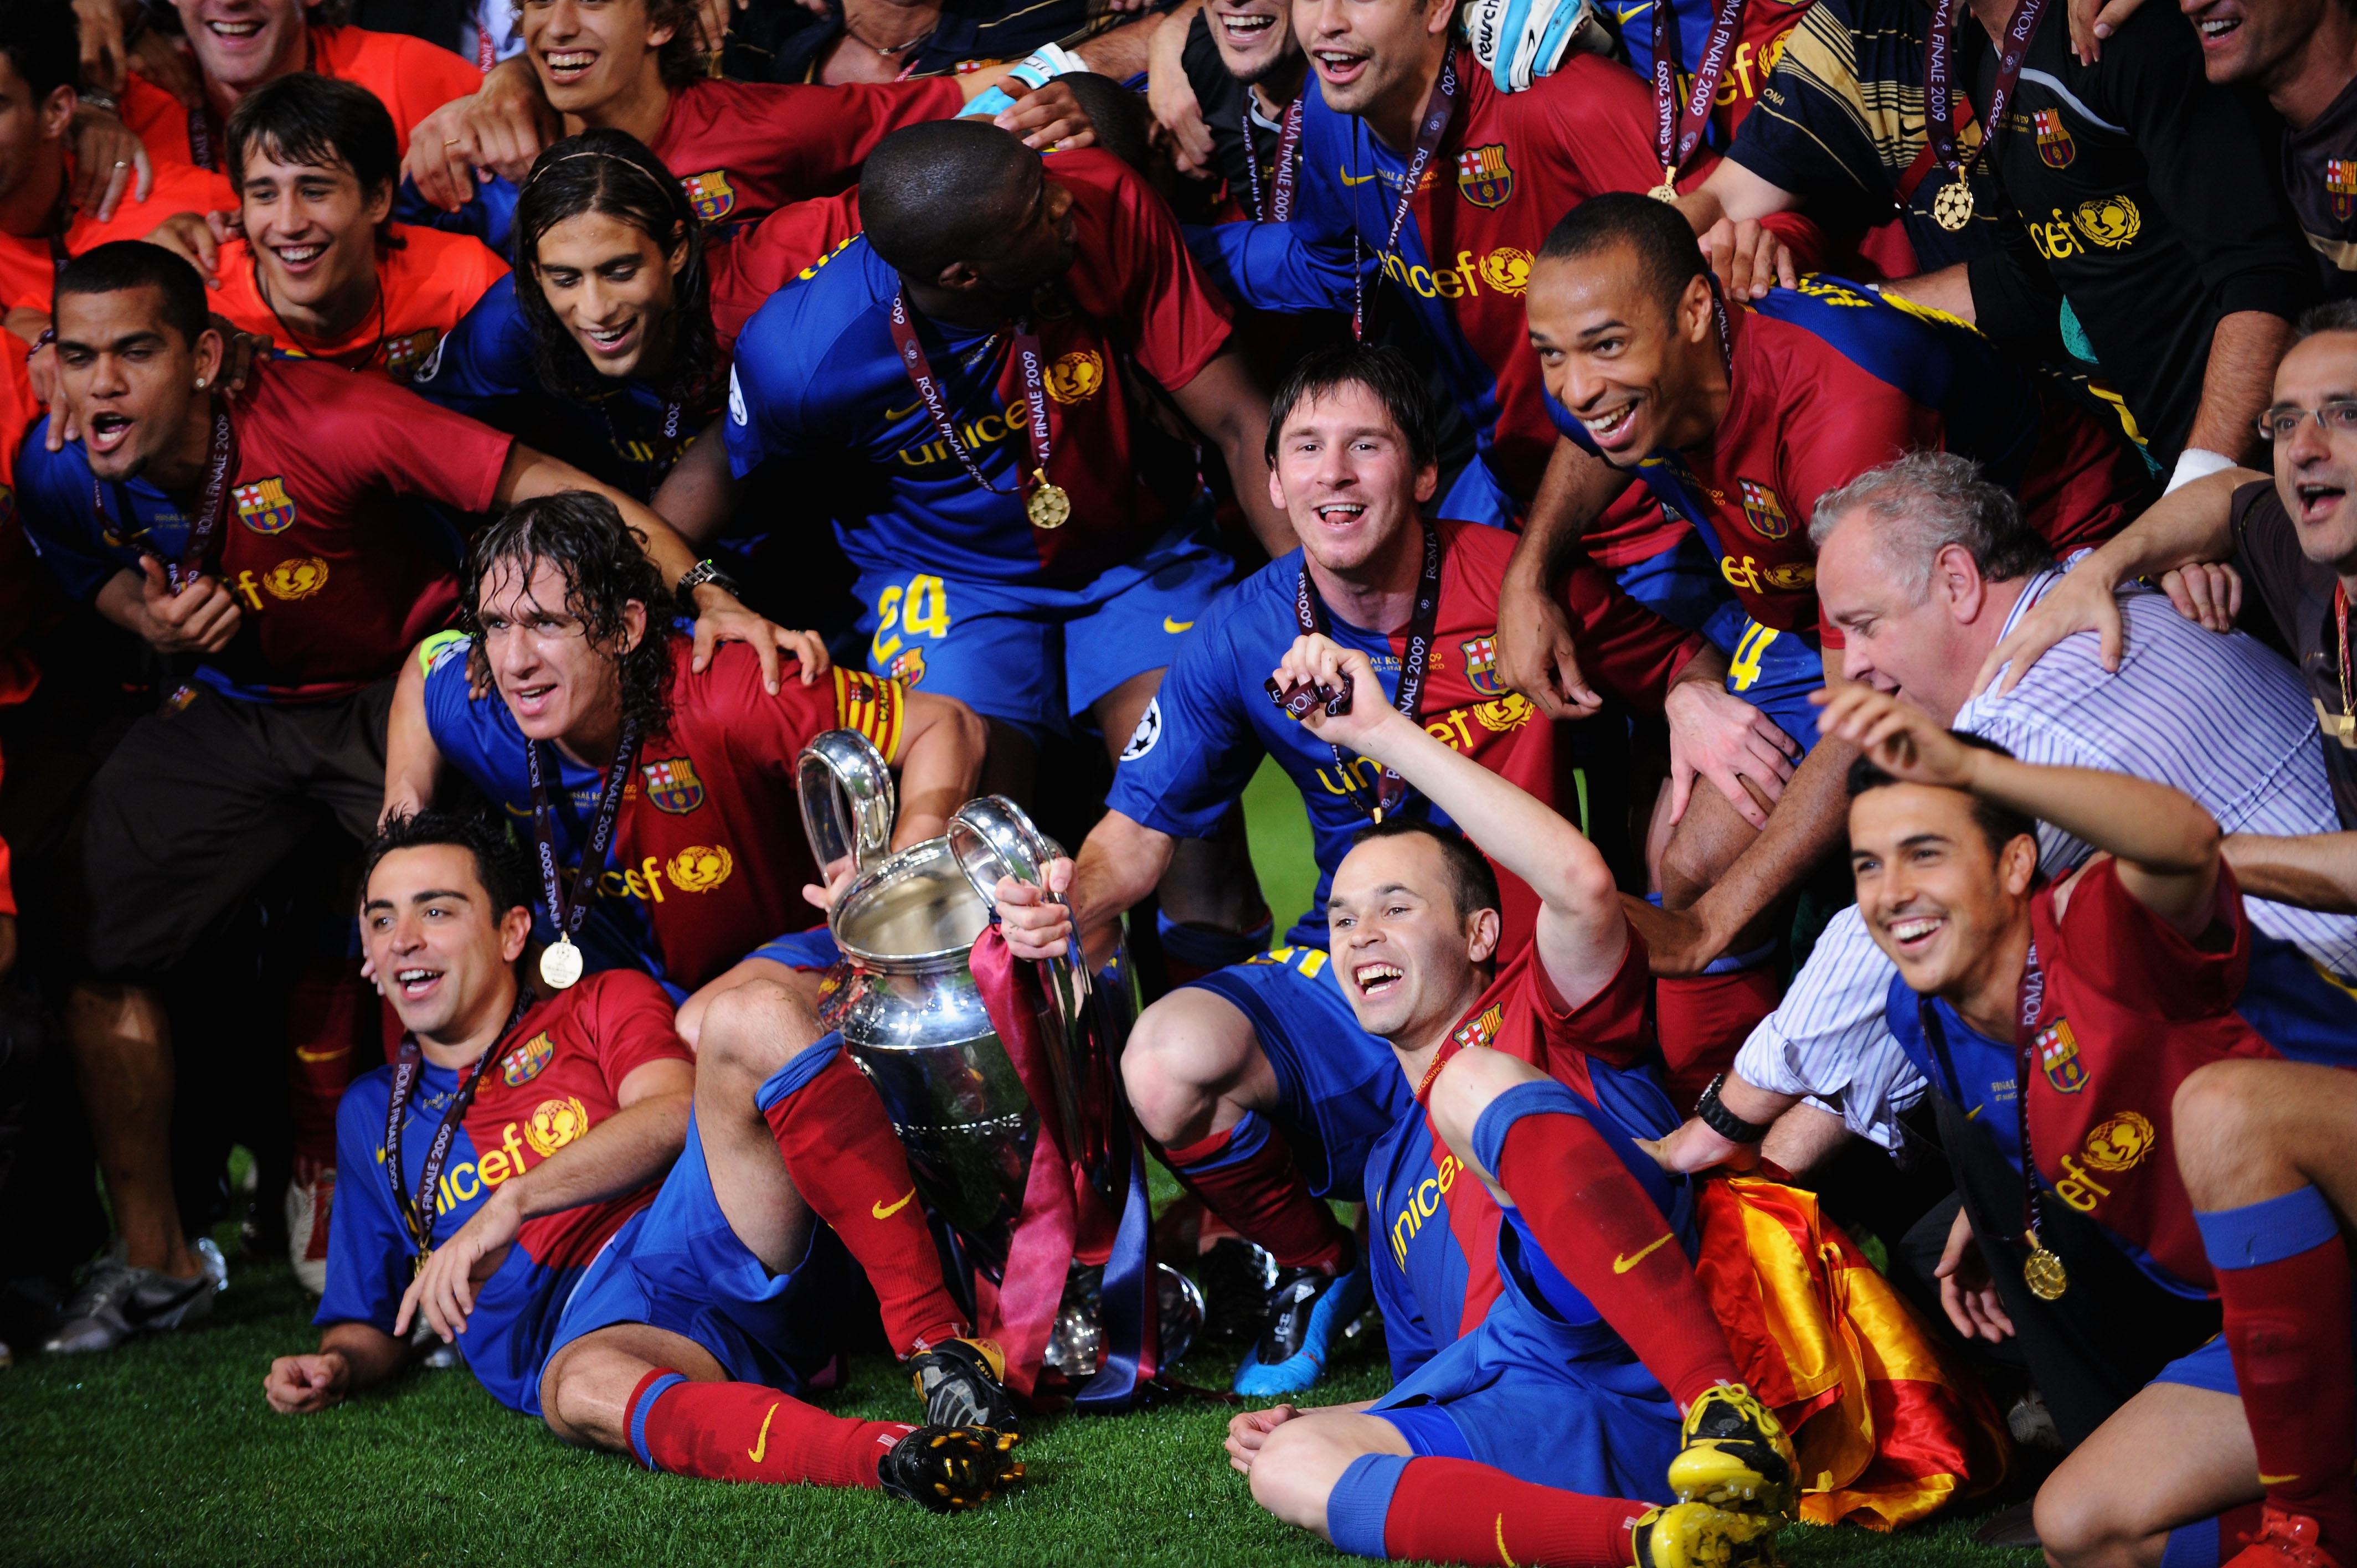 ROME - MAY 27:  Barcelona players pose in front of the trophy after they celebrate winning the UEFA Champions League Final match between Barcelona and Manchester United at the Stadio Olimpico on May 27, 2009 in Rome, Italy. Barcelona won 2-0.  (Photo by S